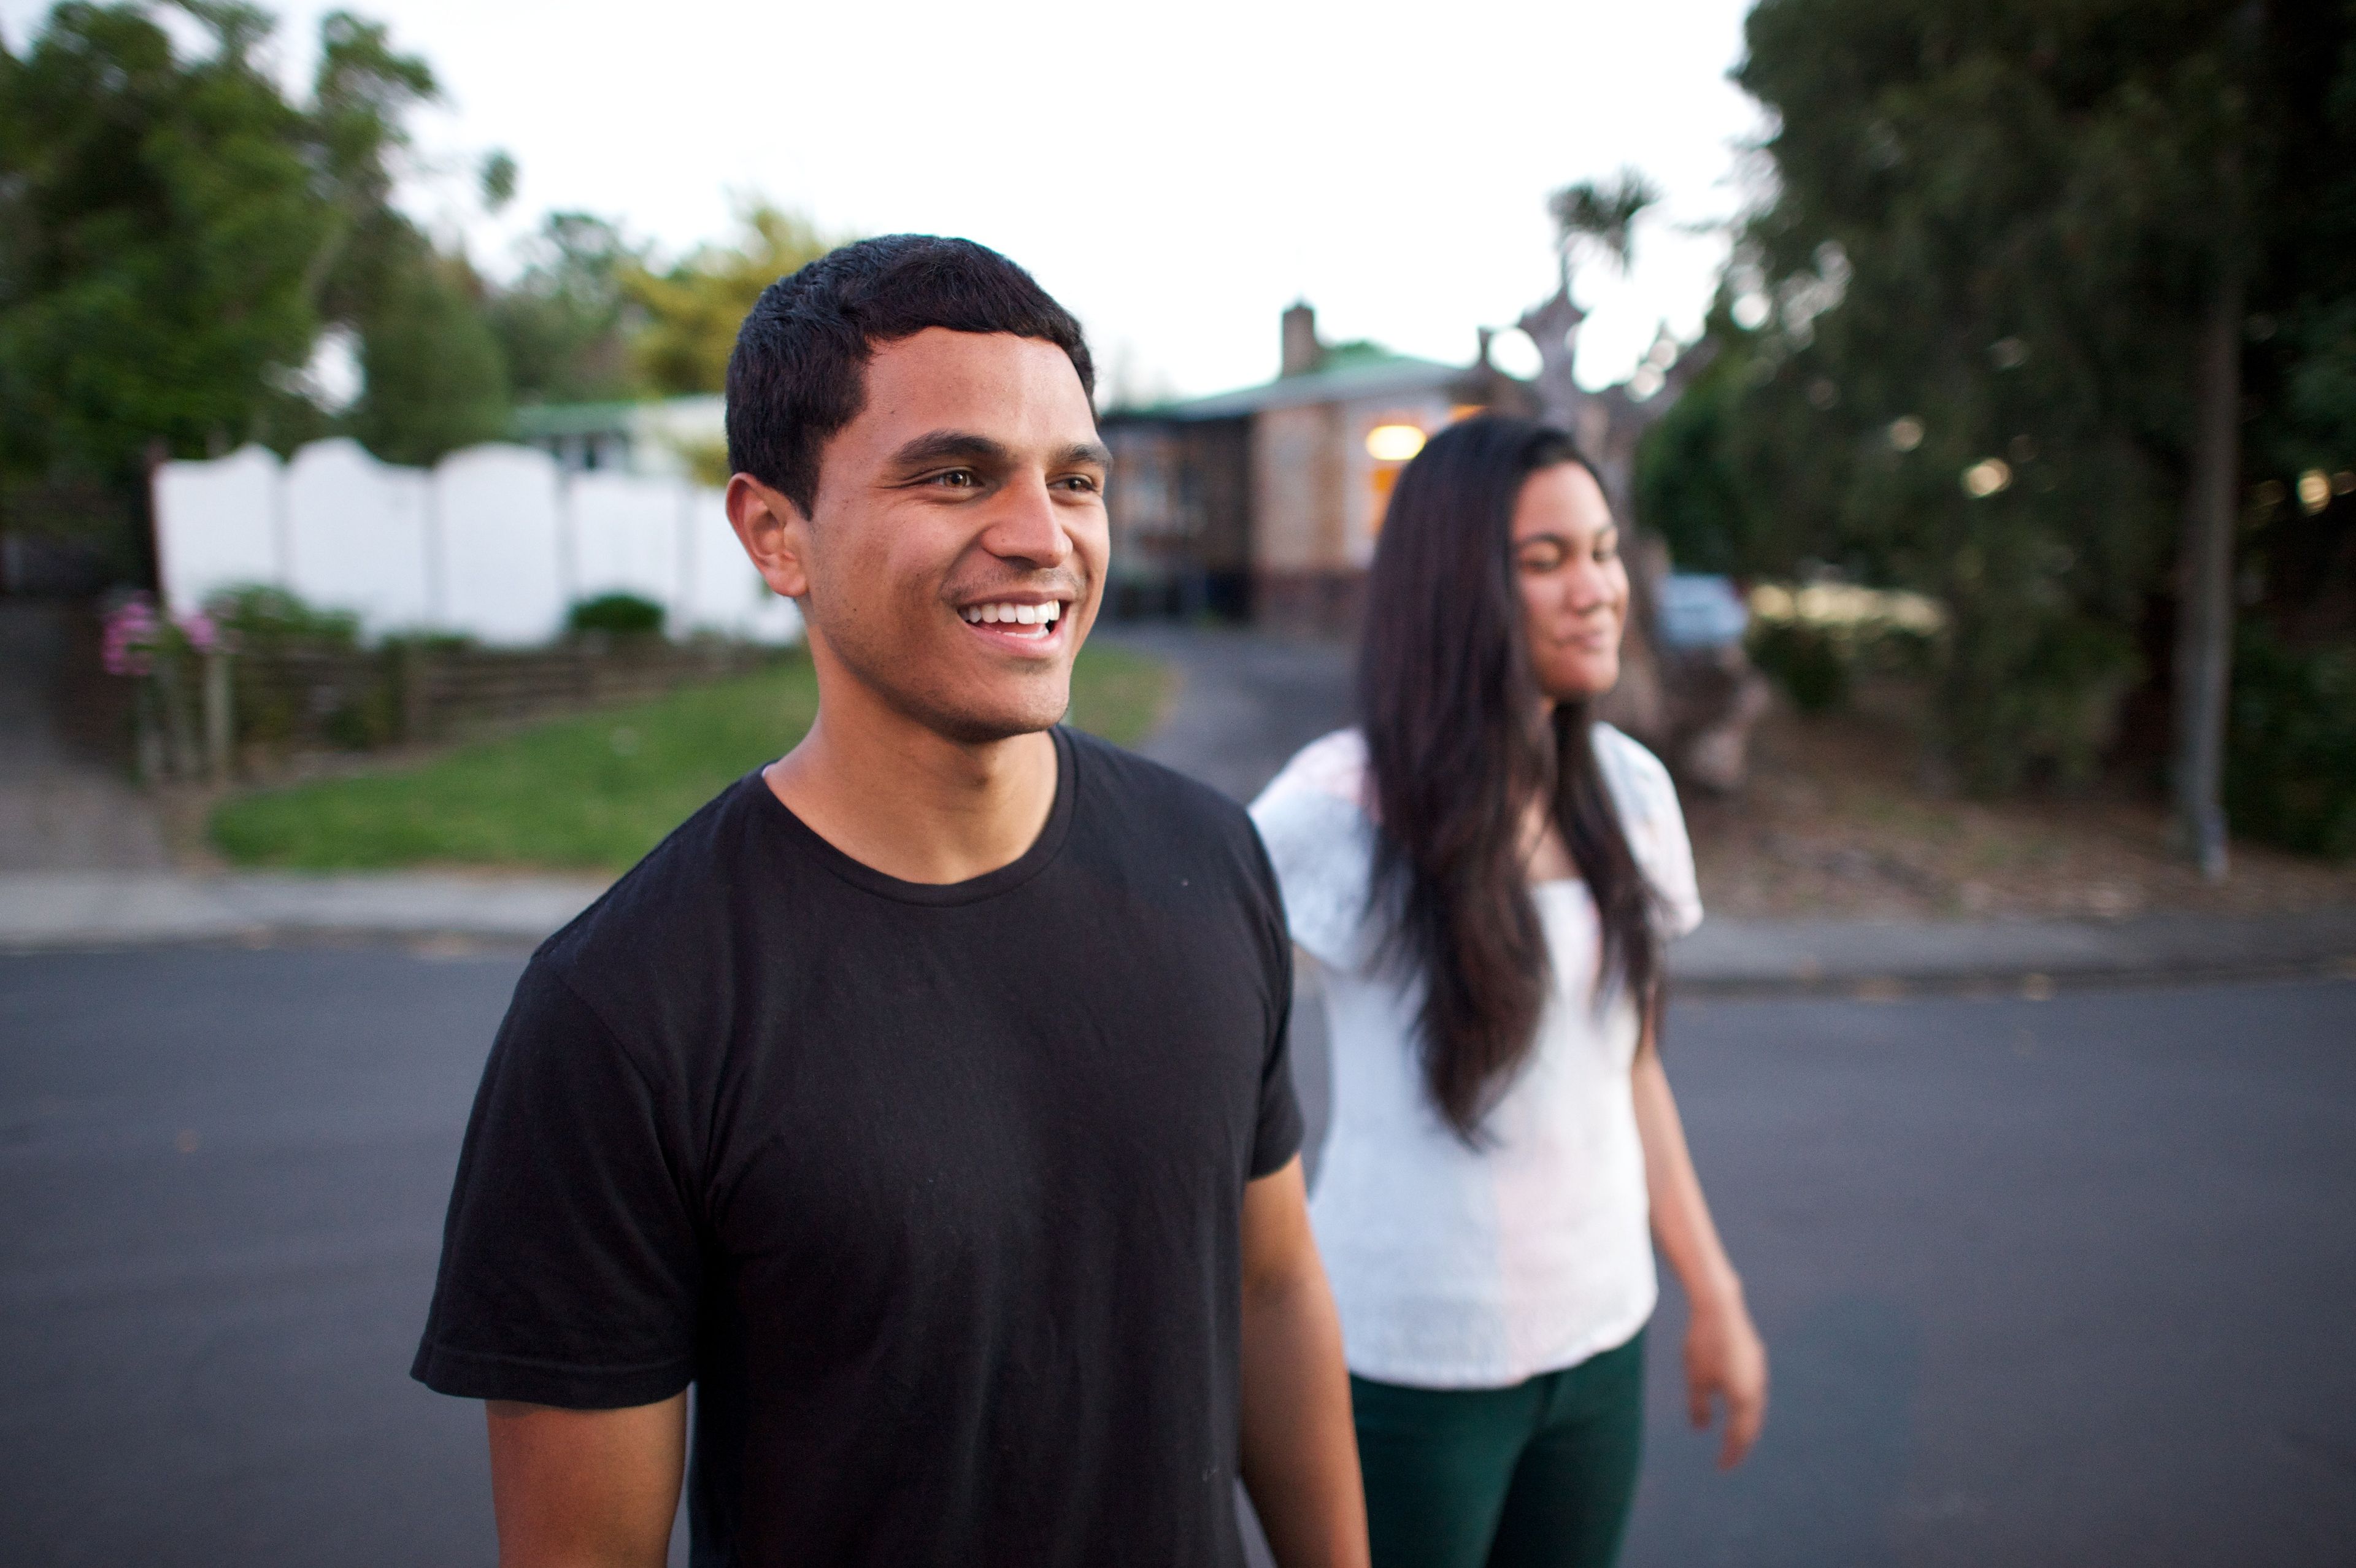 A young man in New Zealand smiles while walking outside next to a young woman.